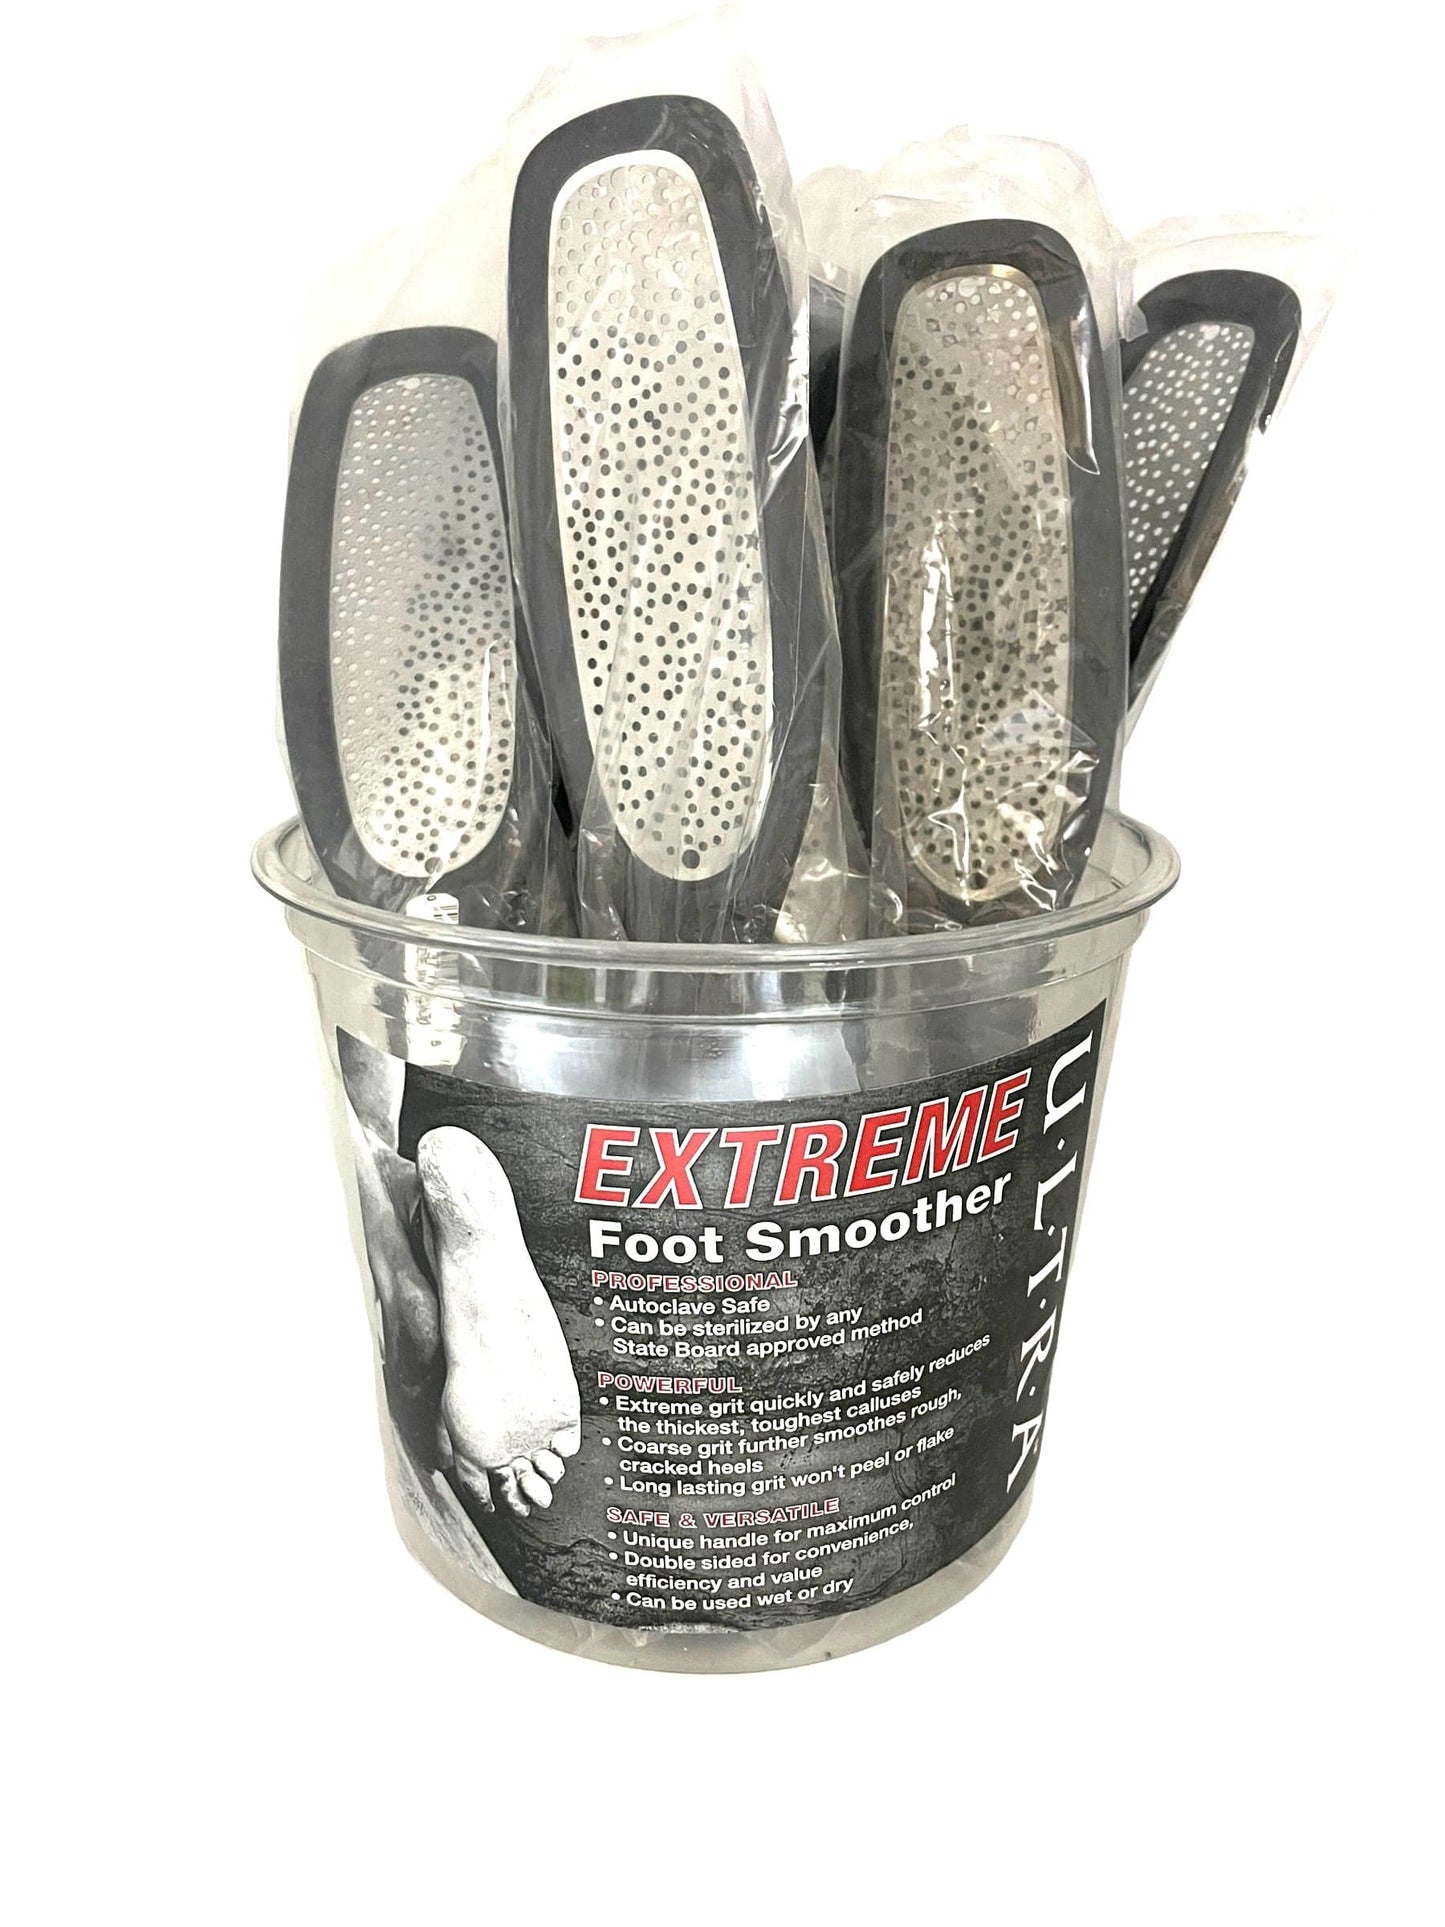 Foot File Callus Remover Extreme Smoother 2 Sided Grit